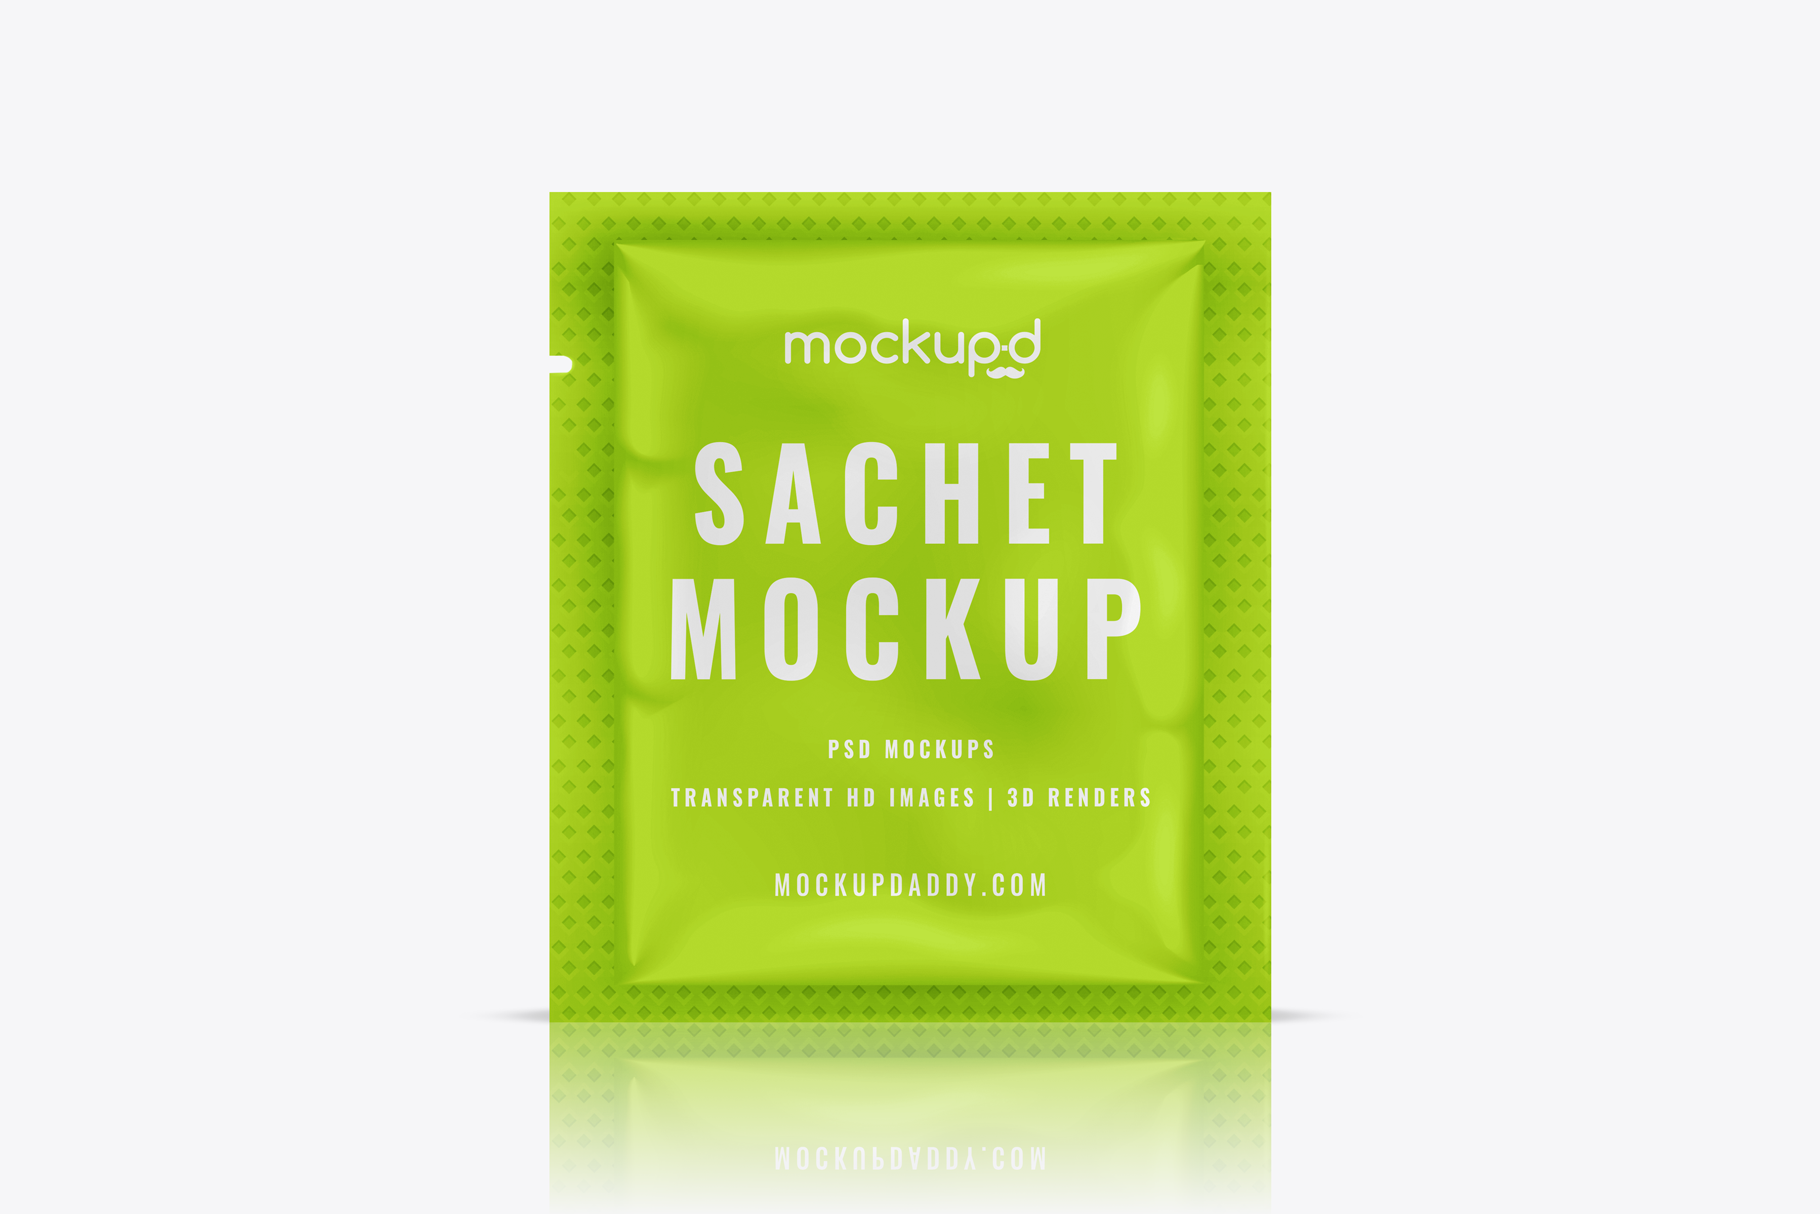 Small and wide Sachet Mockup in green color with white text